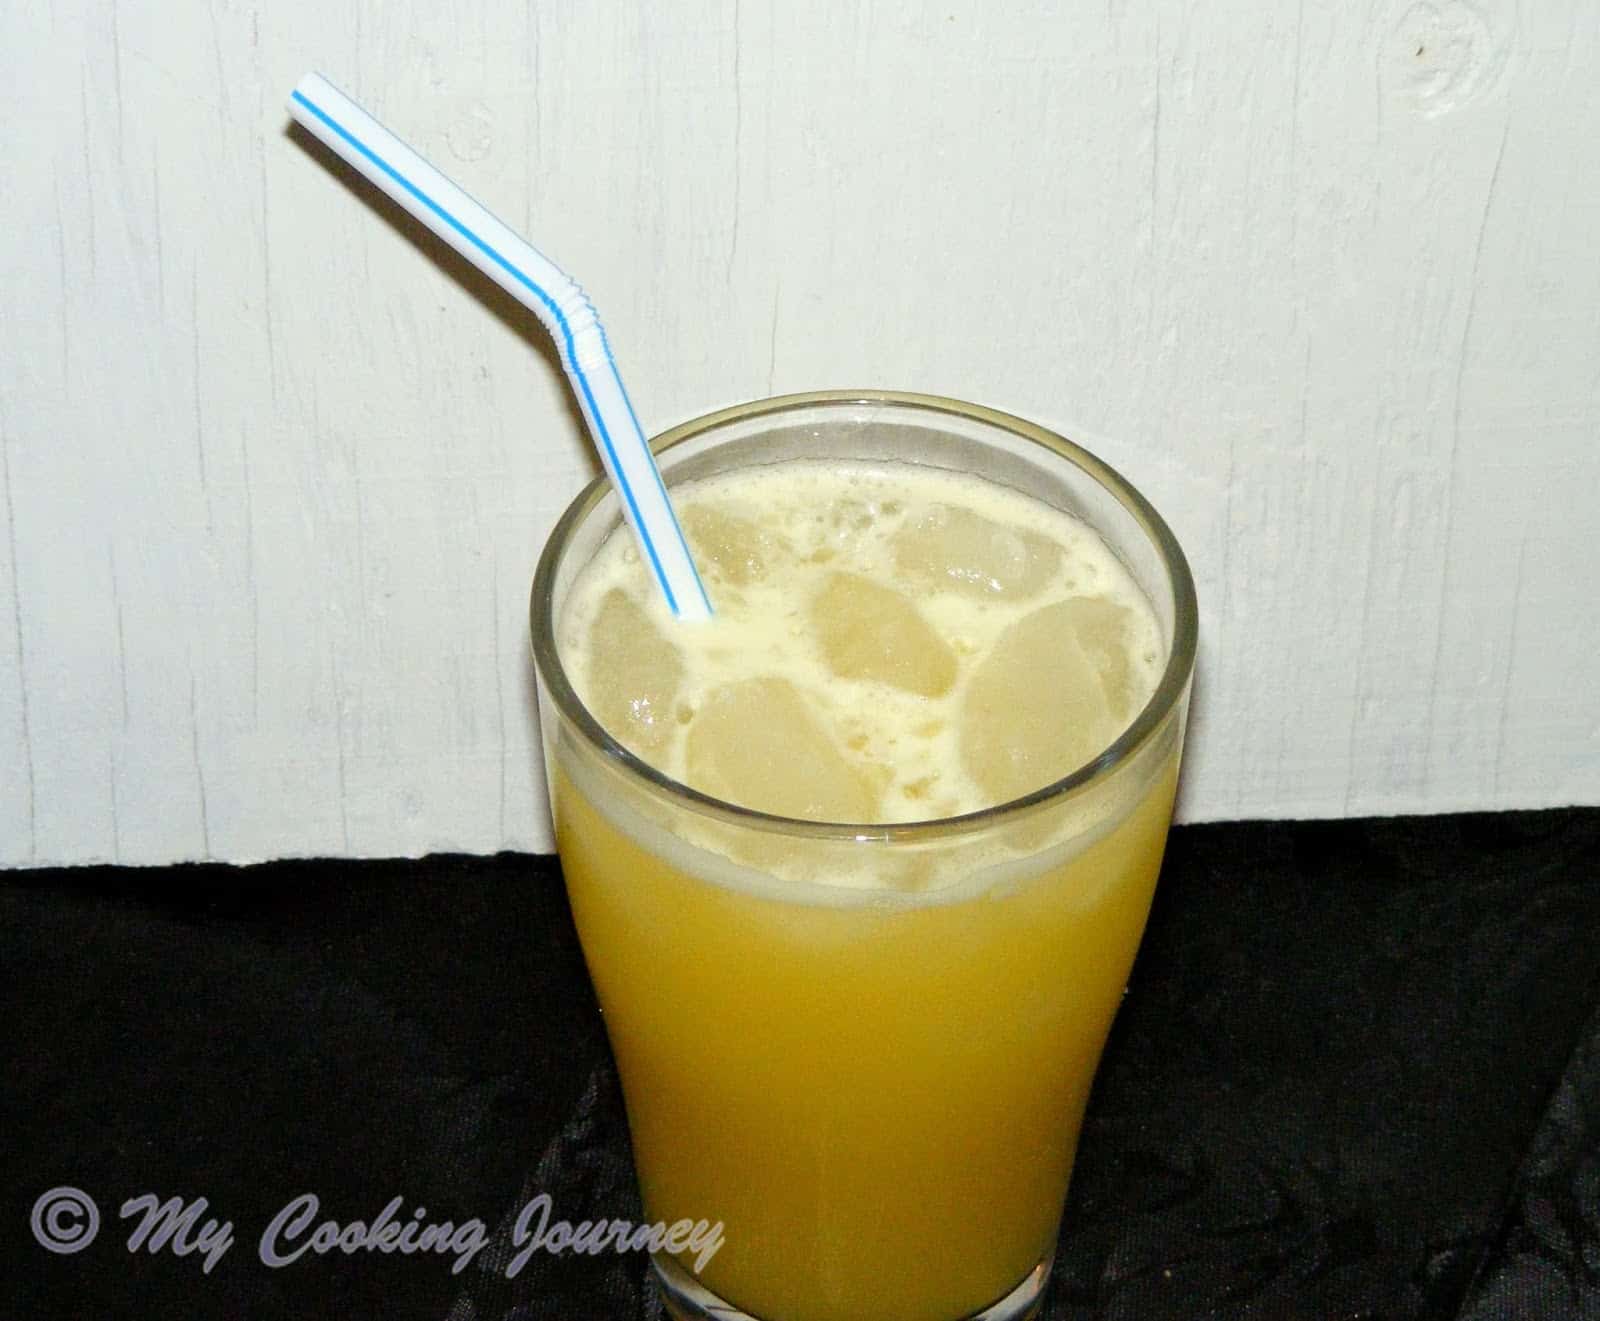 Ginger Beer in a glass with straw